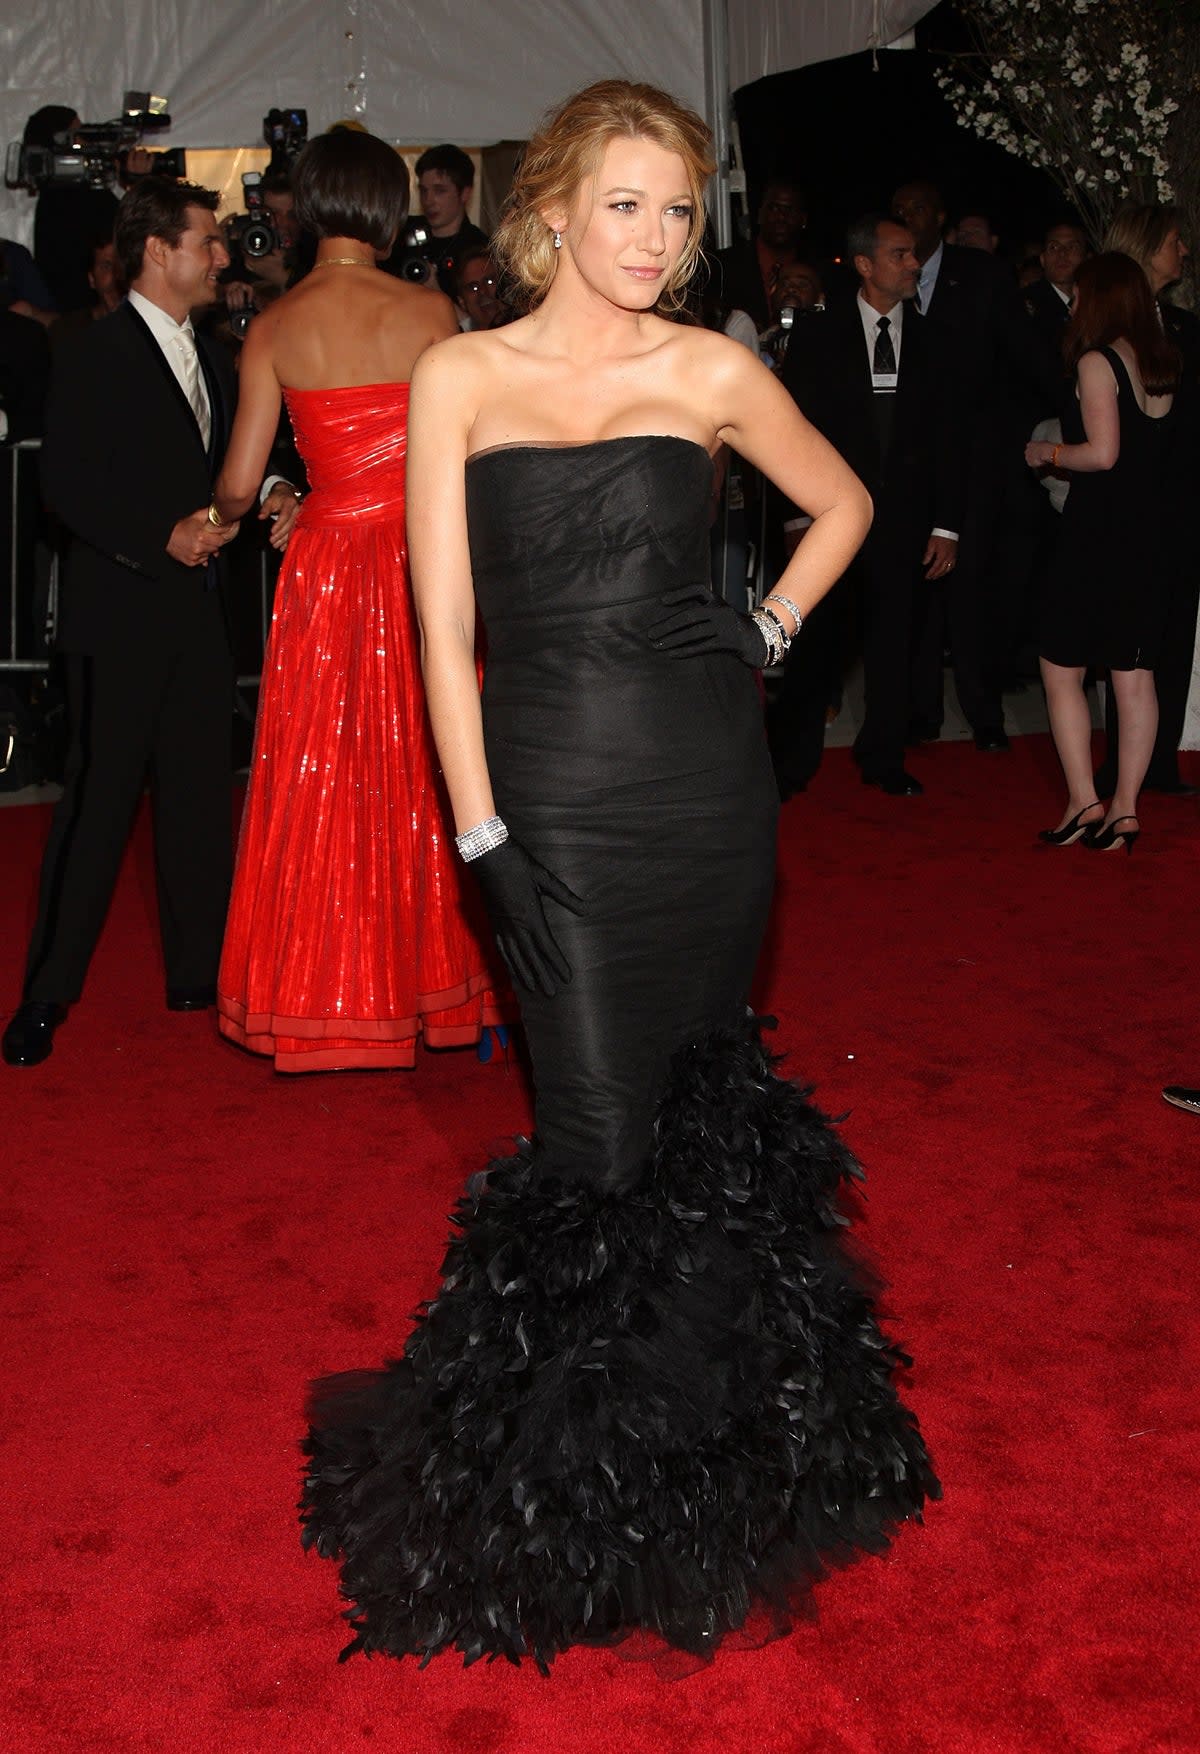 Blake Lively at the 2008 Met Gala (Getty Images)